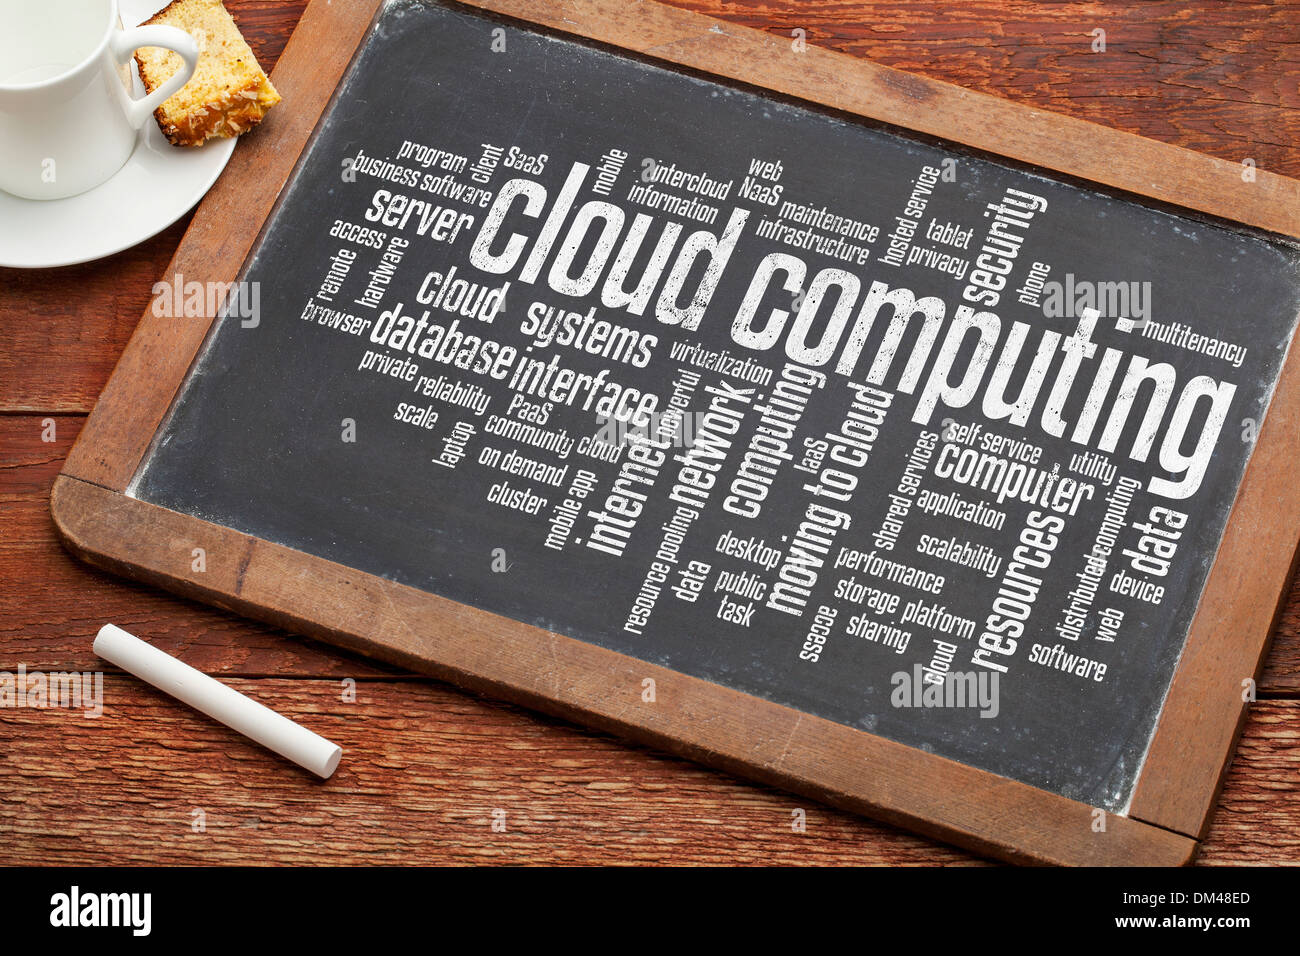 cloud computing word cloud on a vintage slate blackboard with a cup of coffee Stock Photo